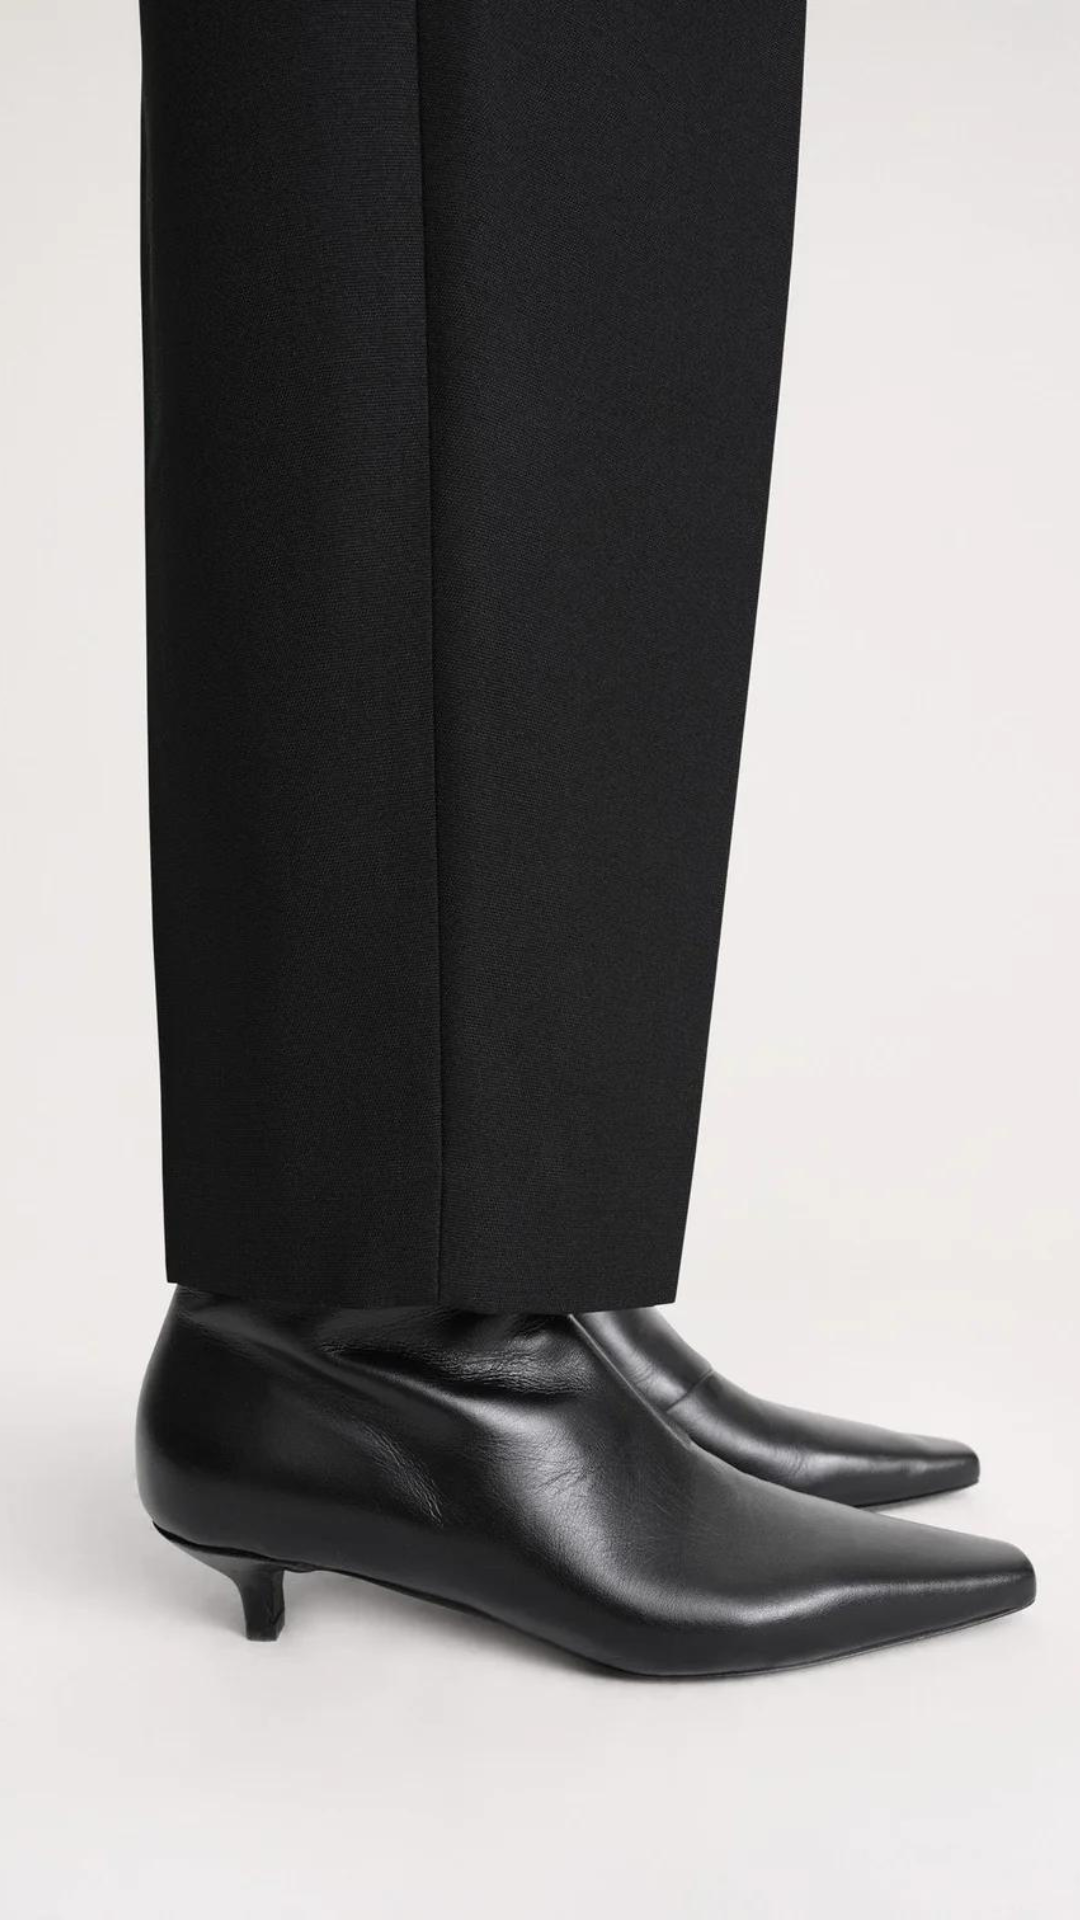 Toteme Slim Ankle Boot